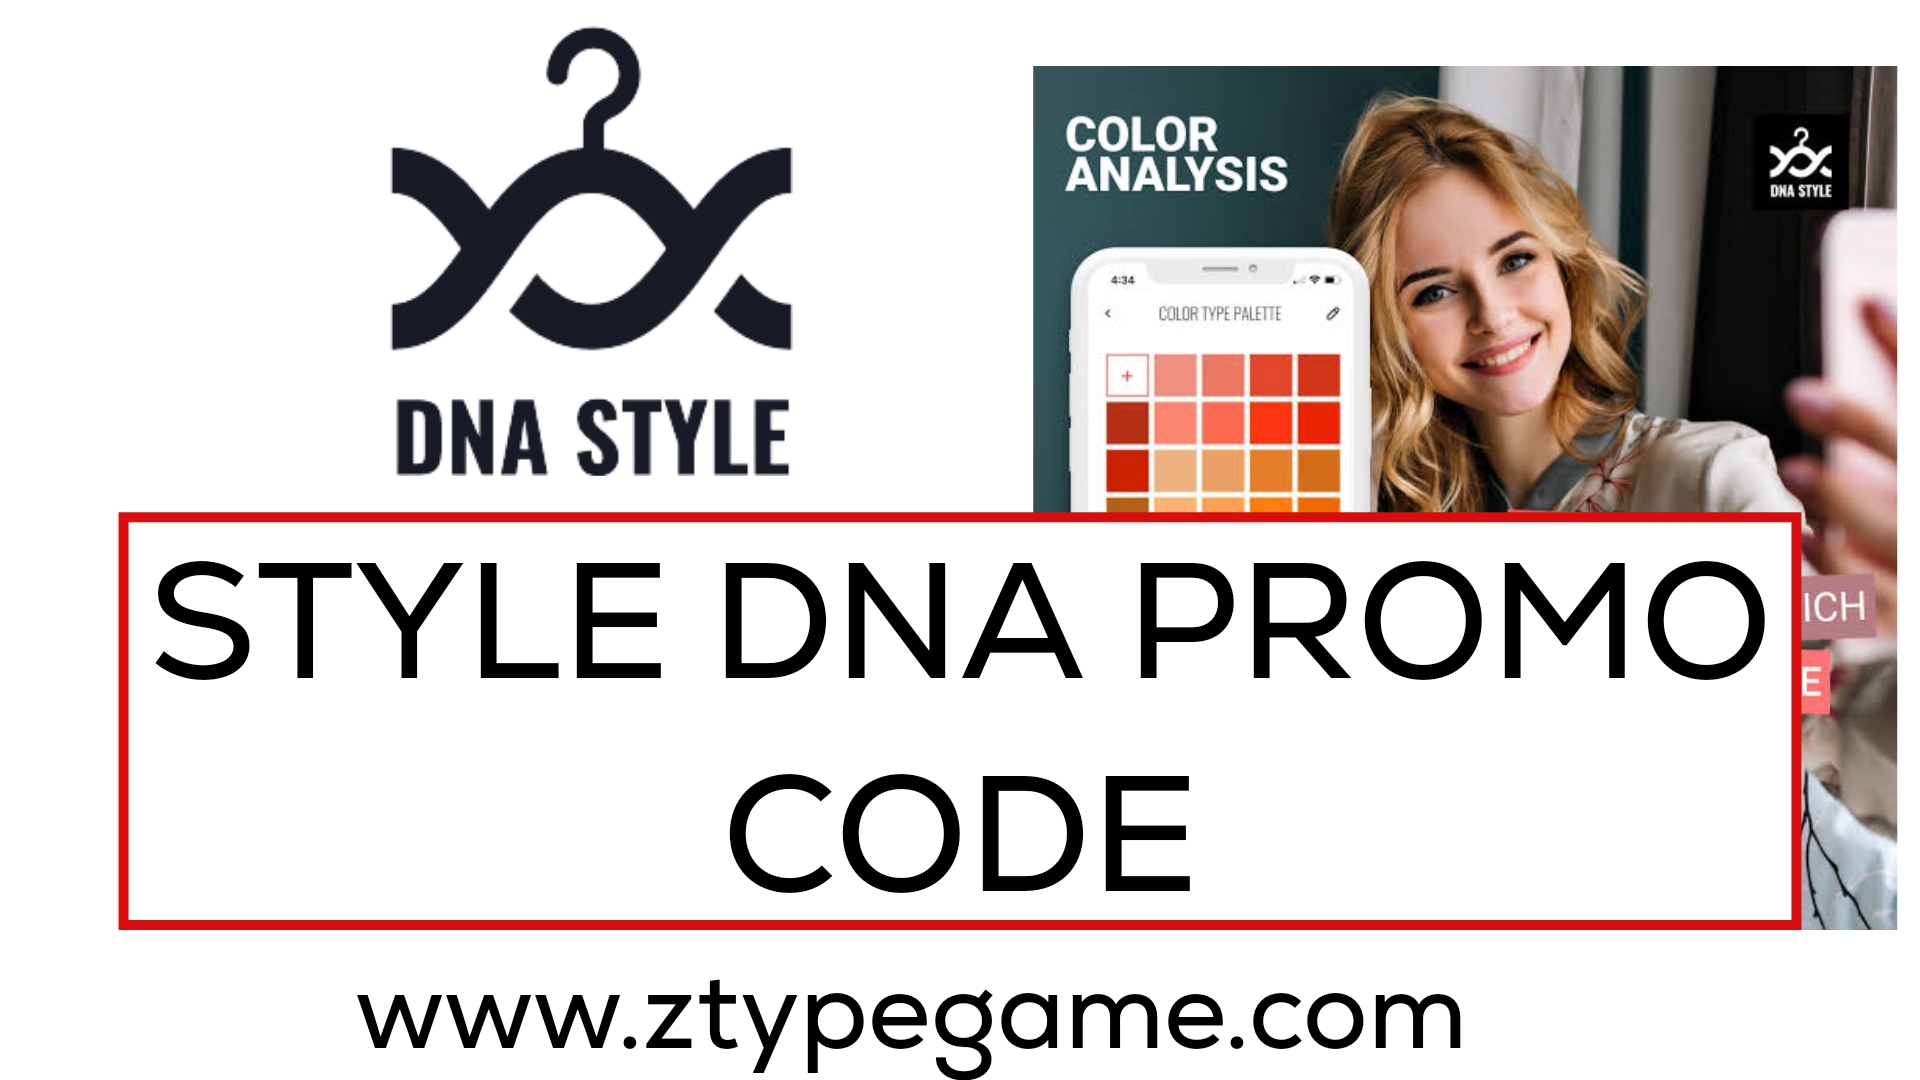 STYLE DNA PROMO CODE FREE